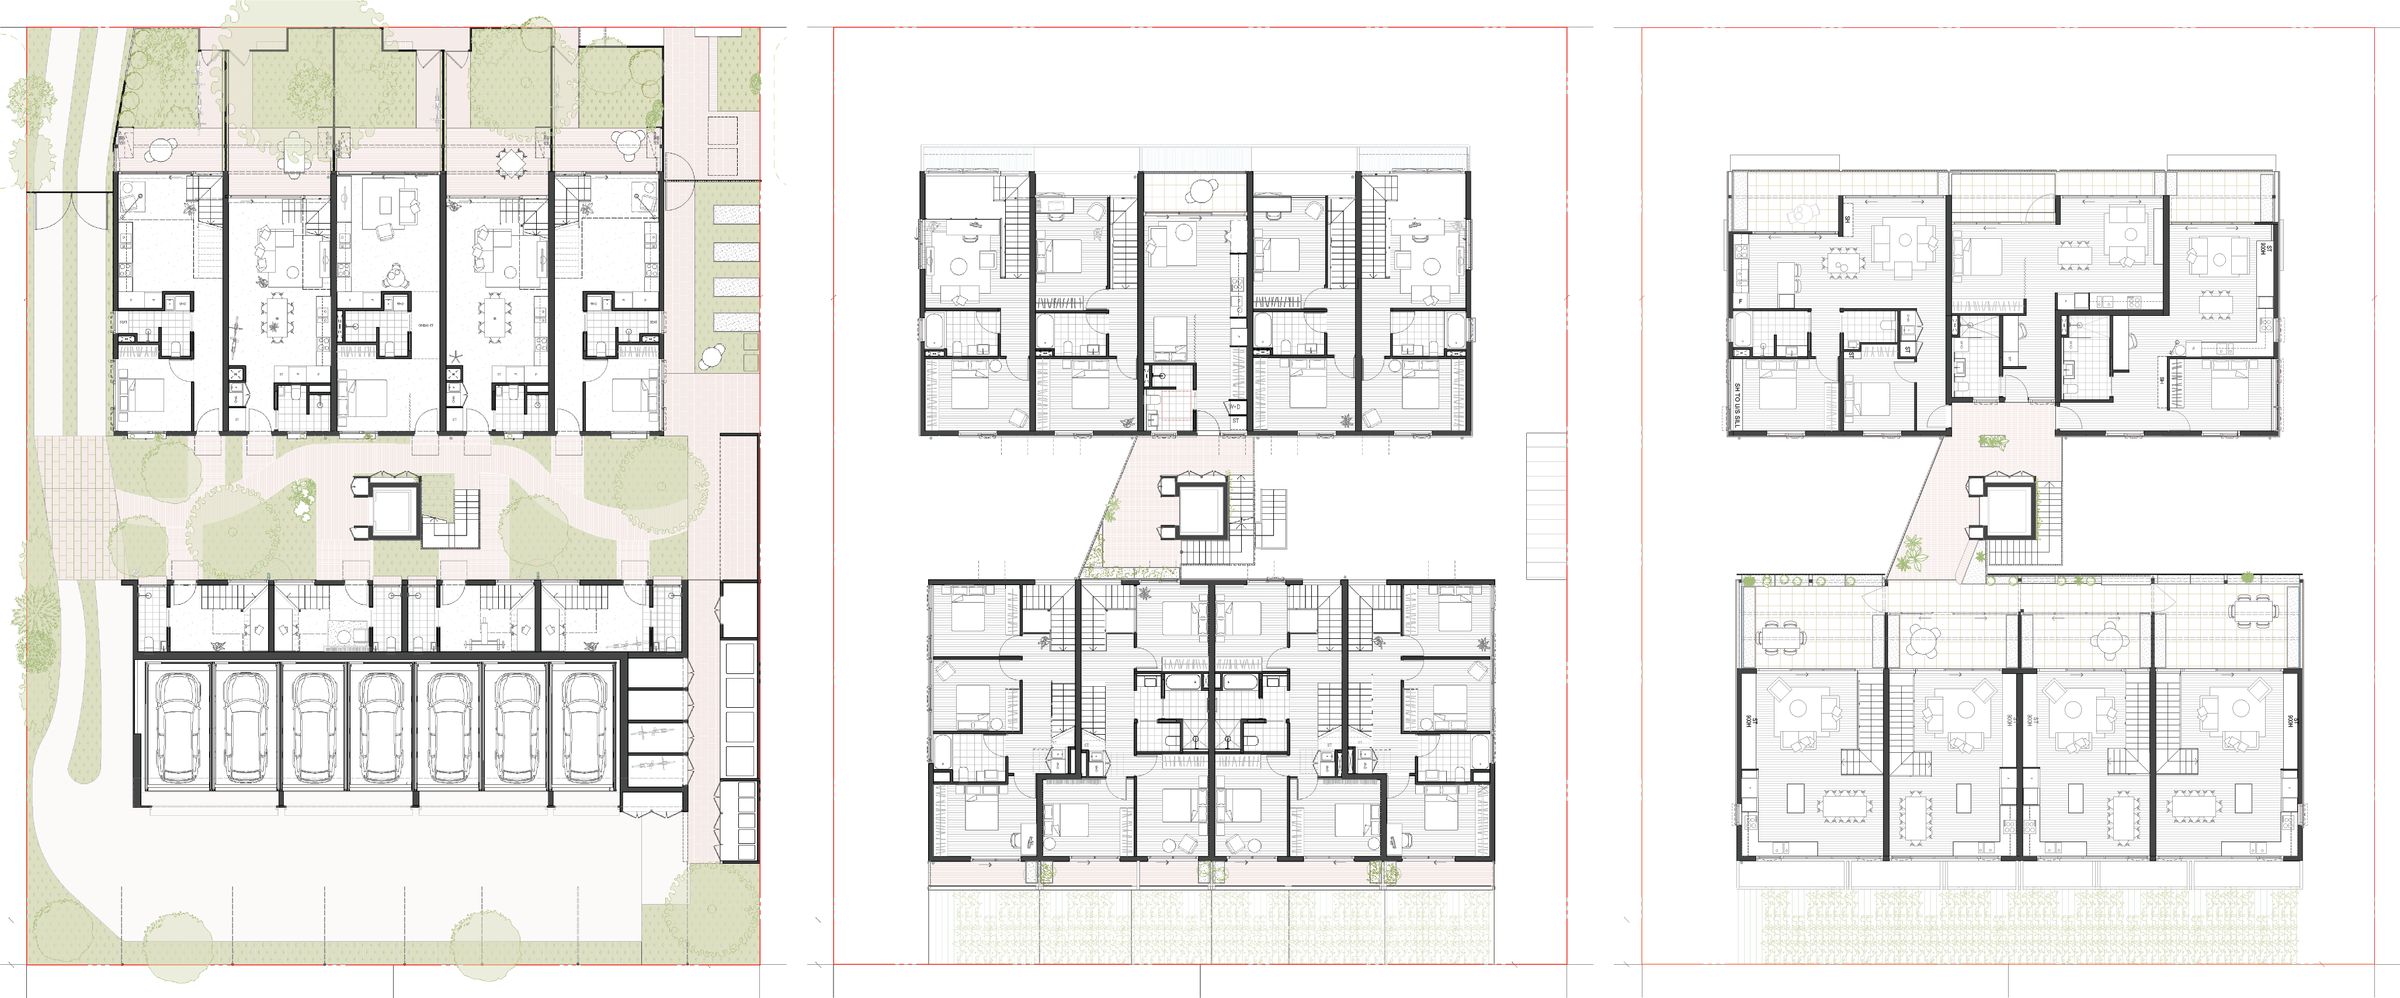 Floor plans of the Future Homes Exemplar Project by LIAN.